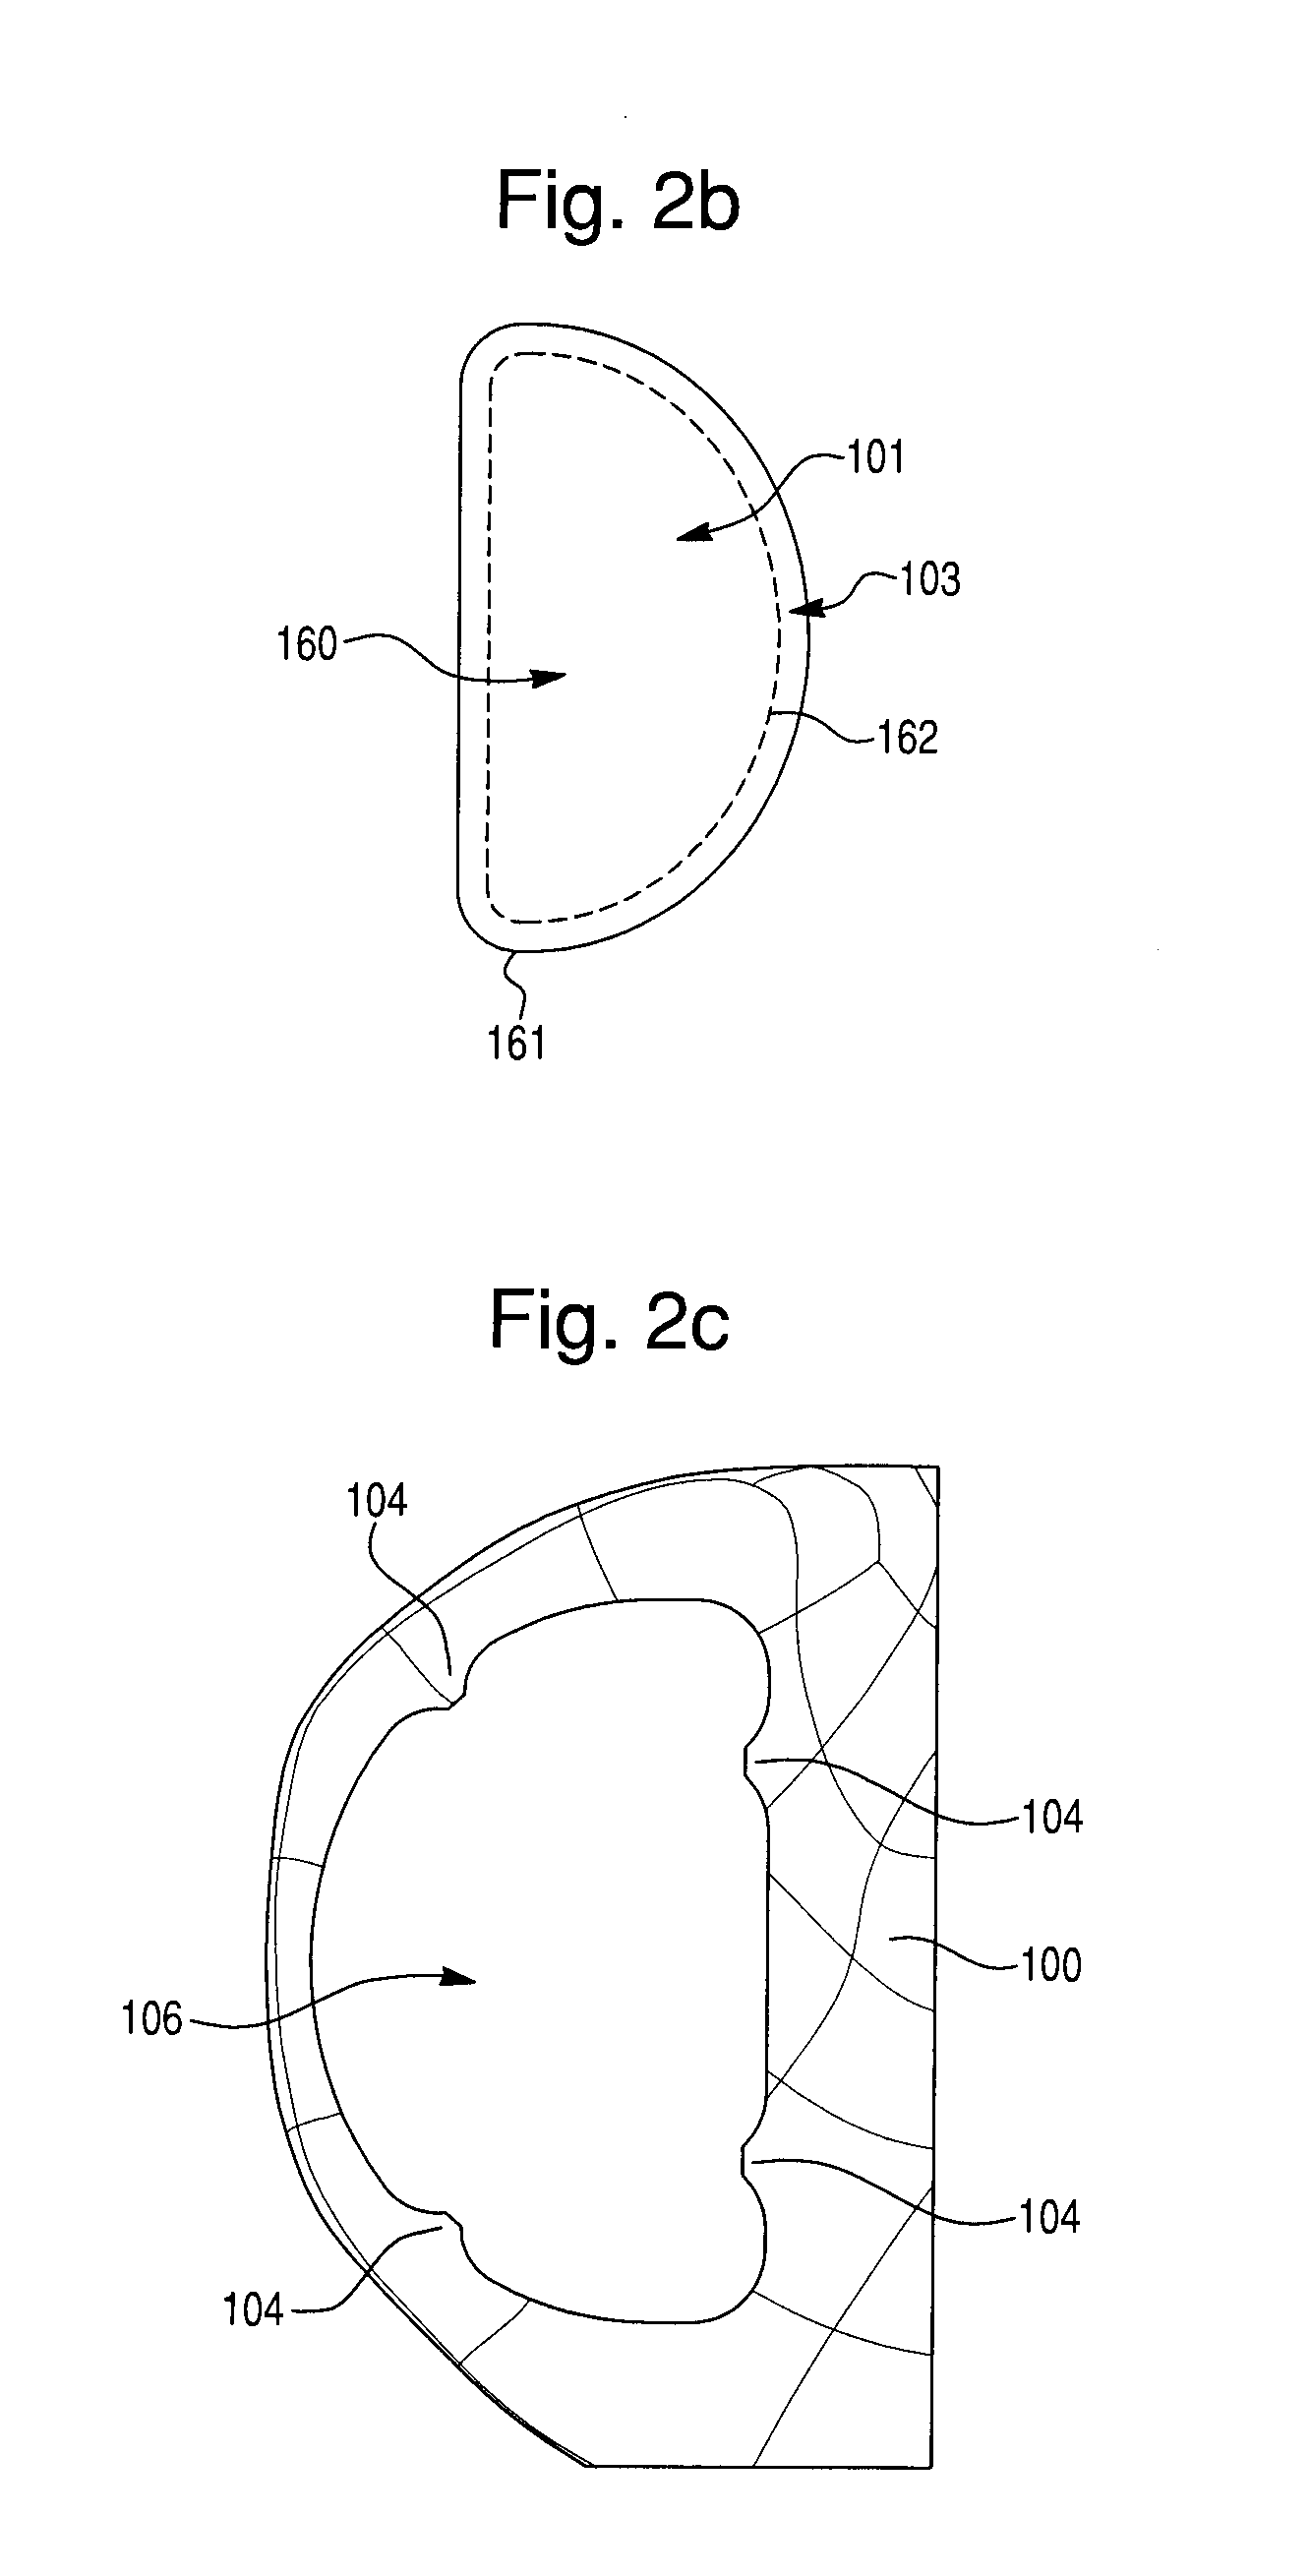 Prosthetic device, method of planning bone removal for implantation of prosthetic device, and robotic system